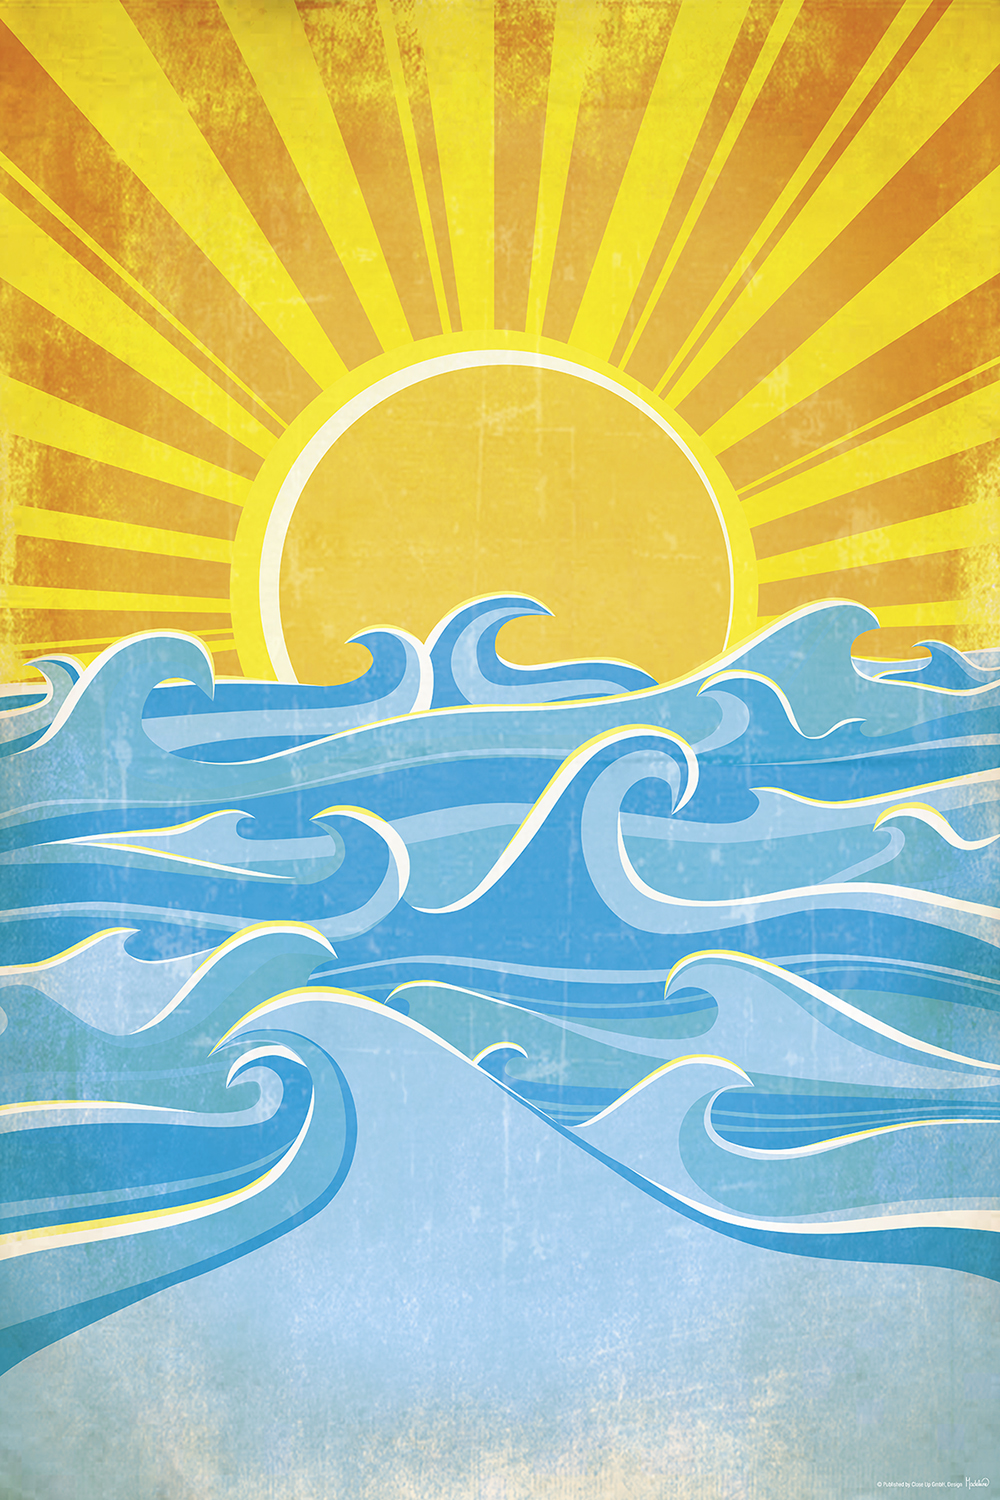 Kunst Poster Madeleine Sea Waves And Yellow Sun Retro Sonne Meer 61 x 91,5 cm 